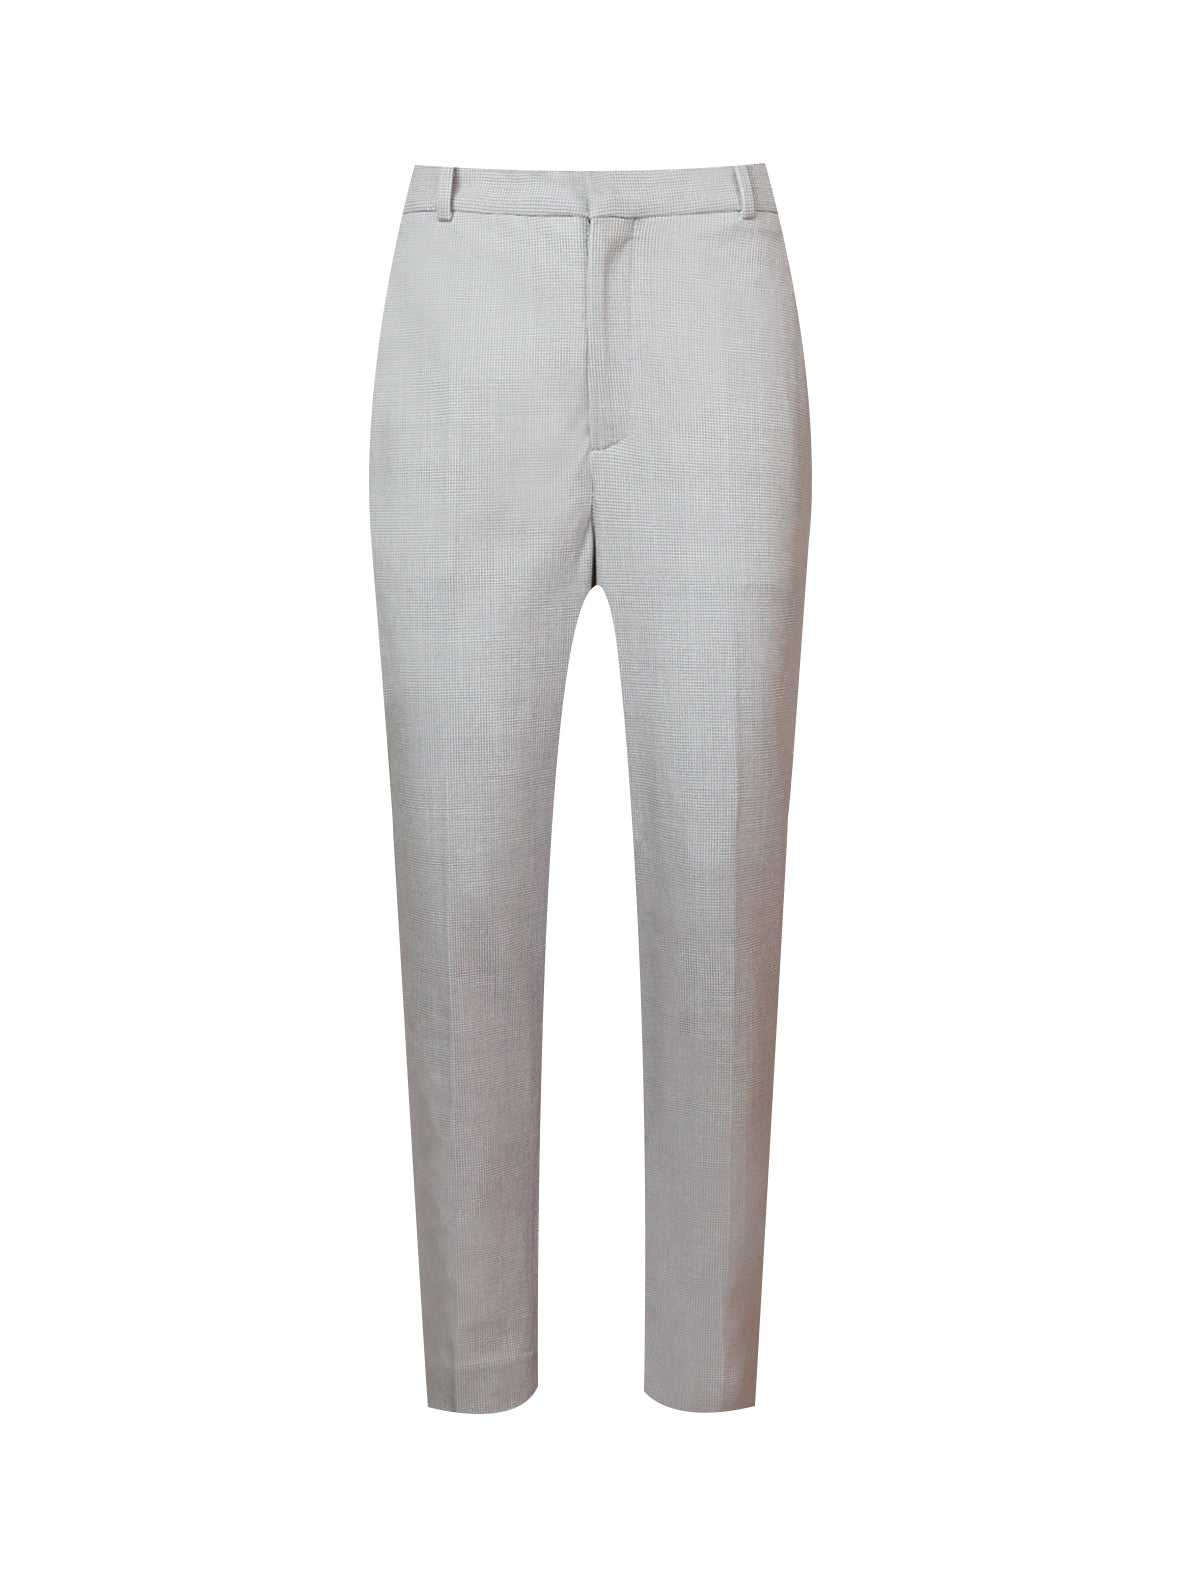 CIRCOLO 1901 Tailored Textured Pants in Light Grey